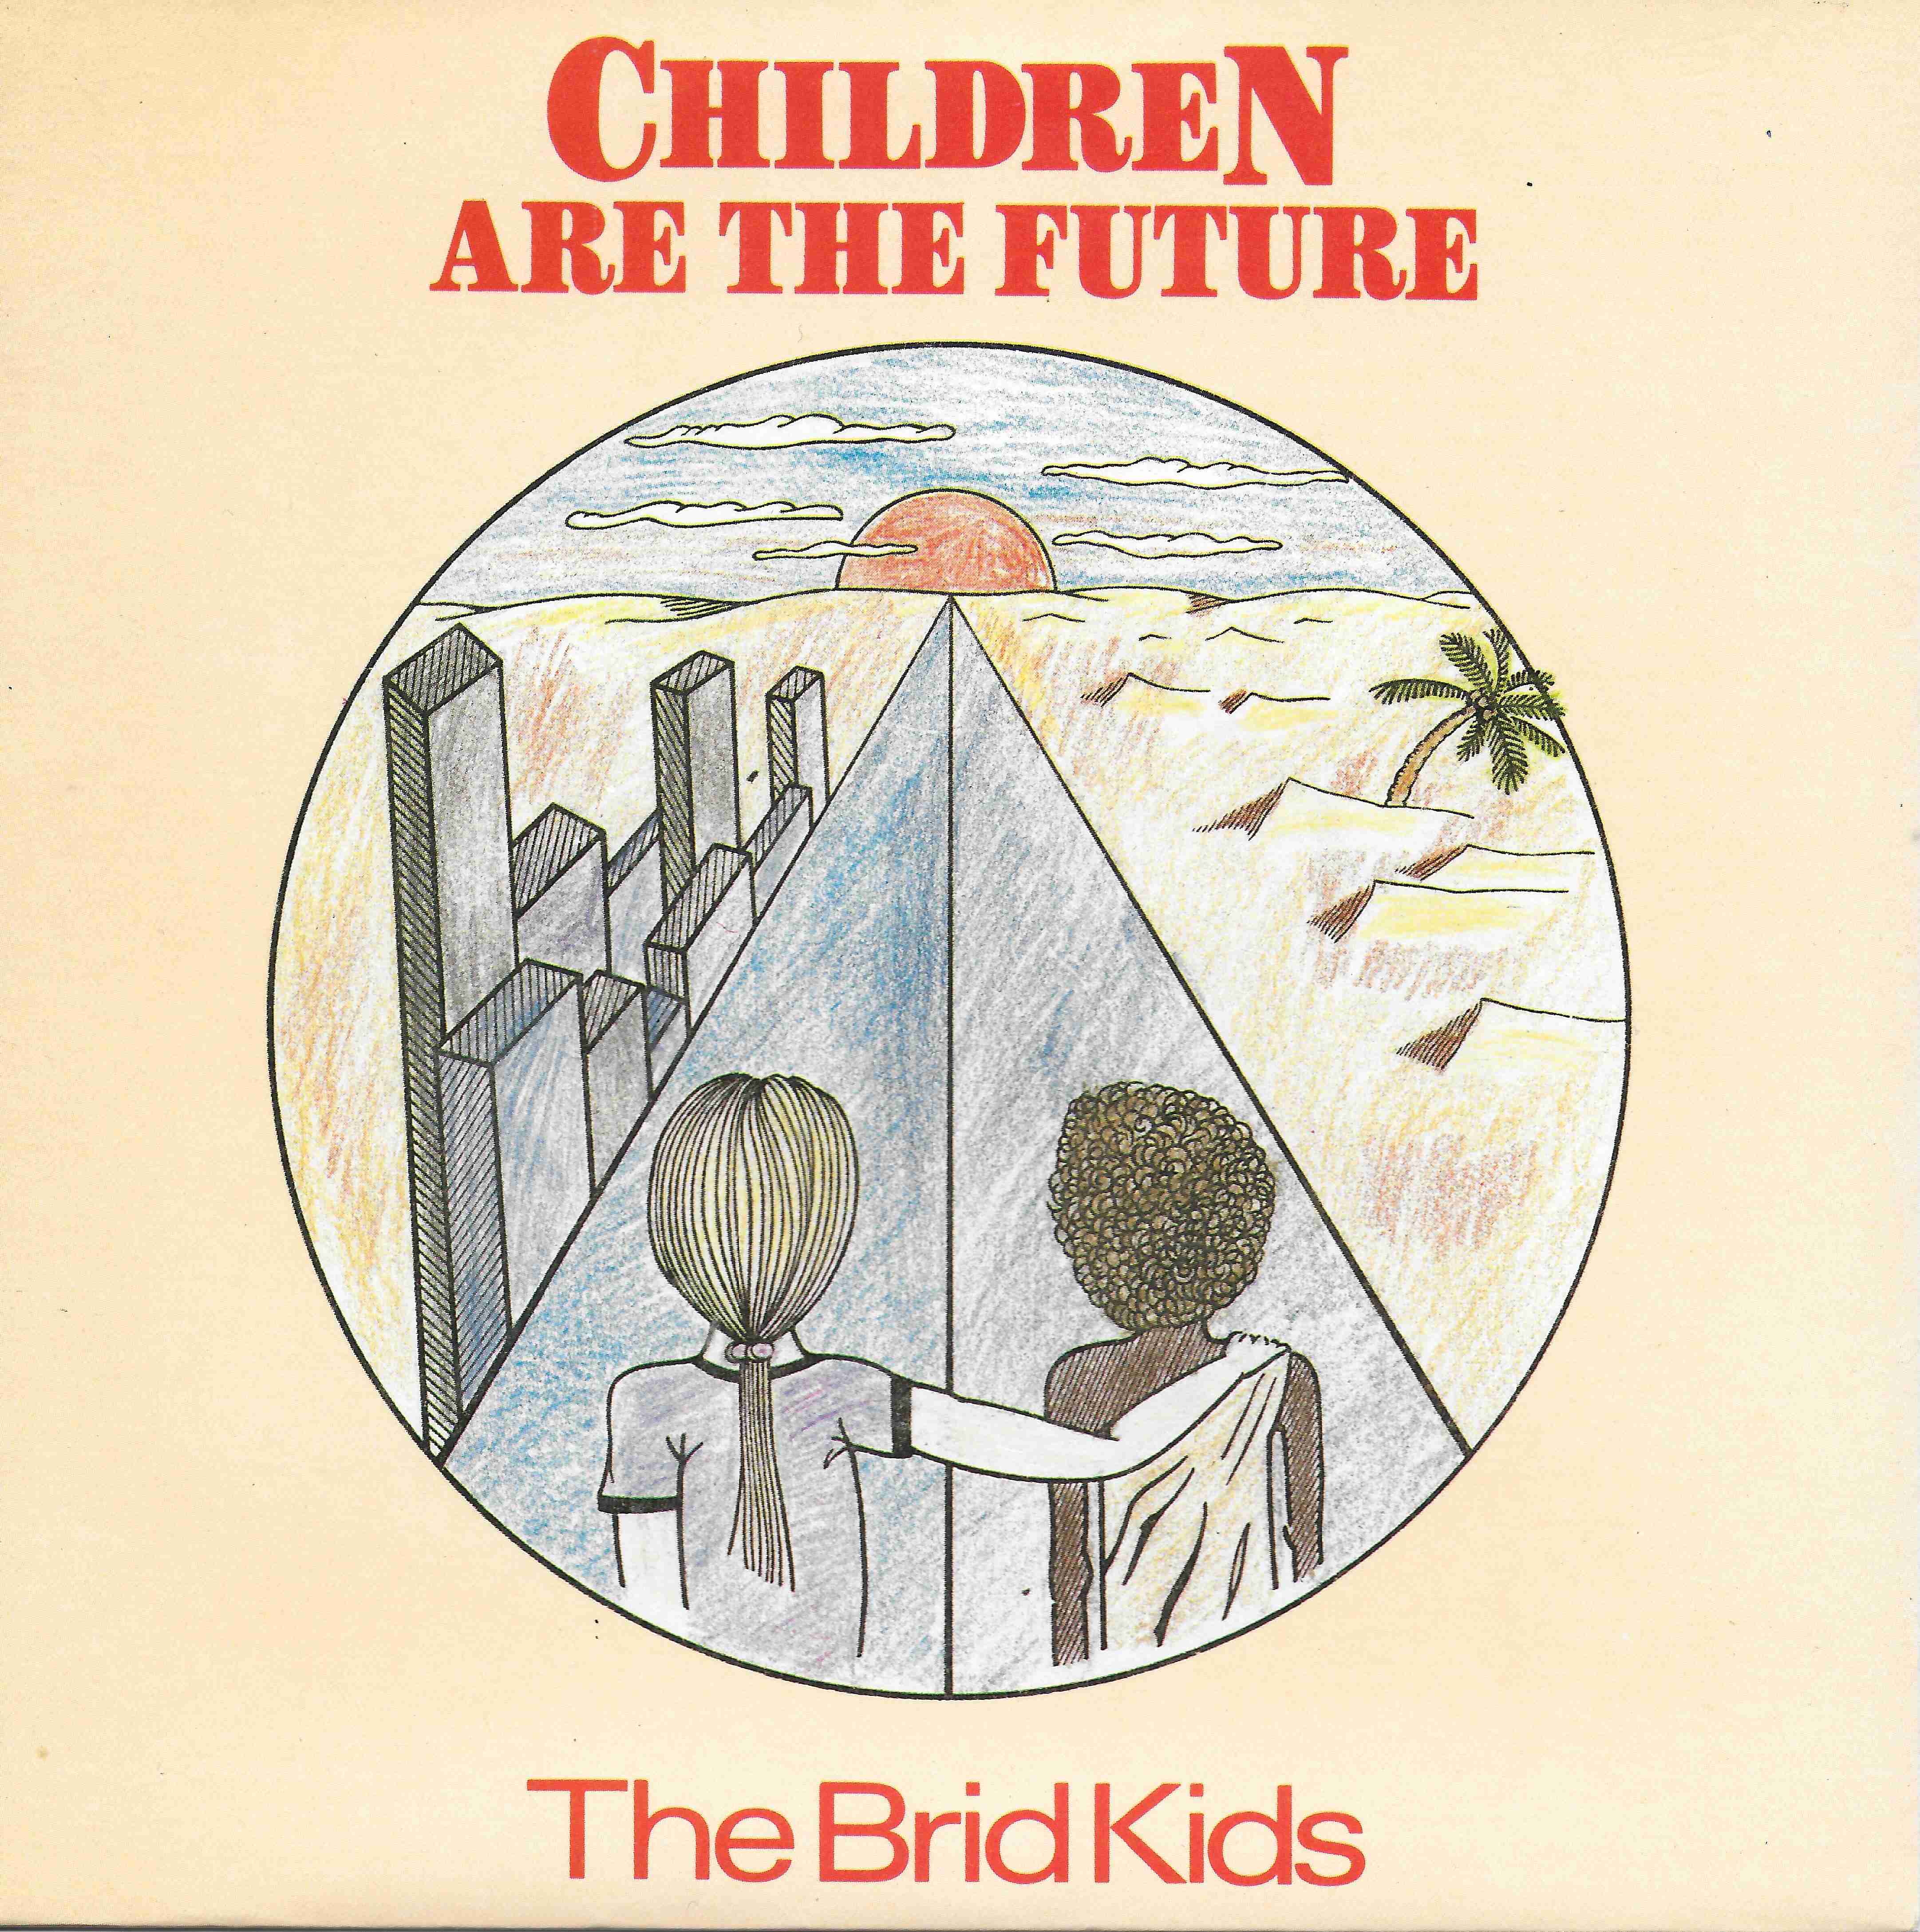 Picture of RESL 232 Children are the future (BBC Children In Need) by artist The Brid Kids from the BBC singles - Records and Tapes library